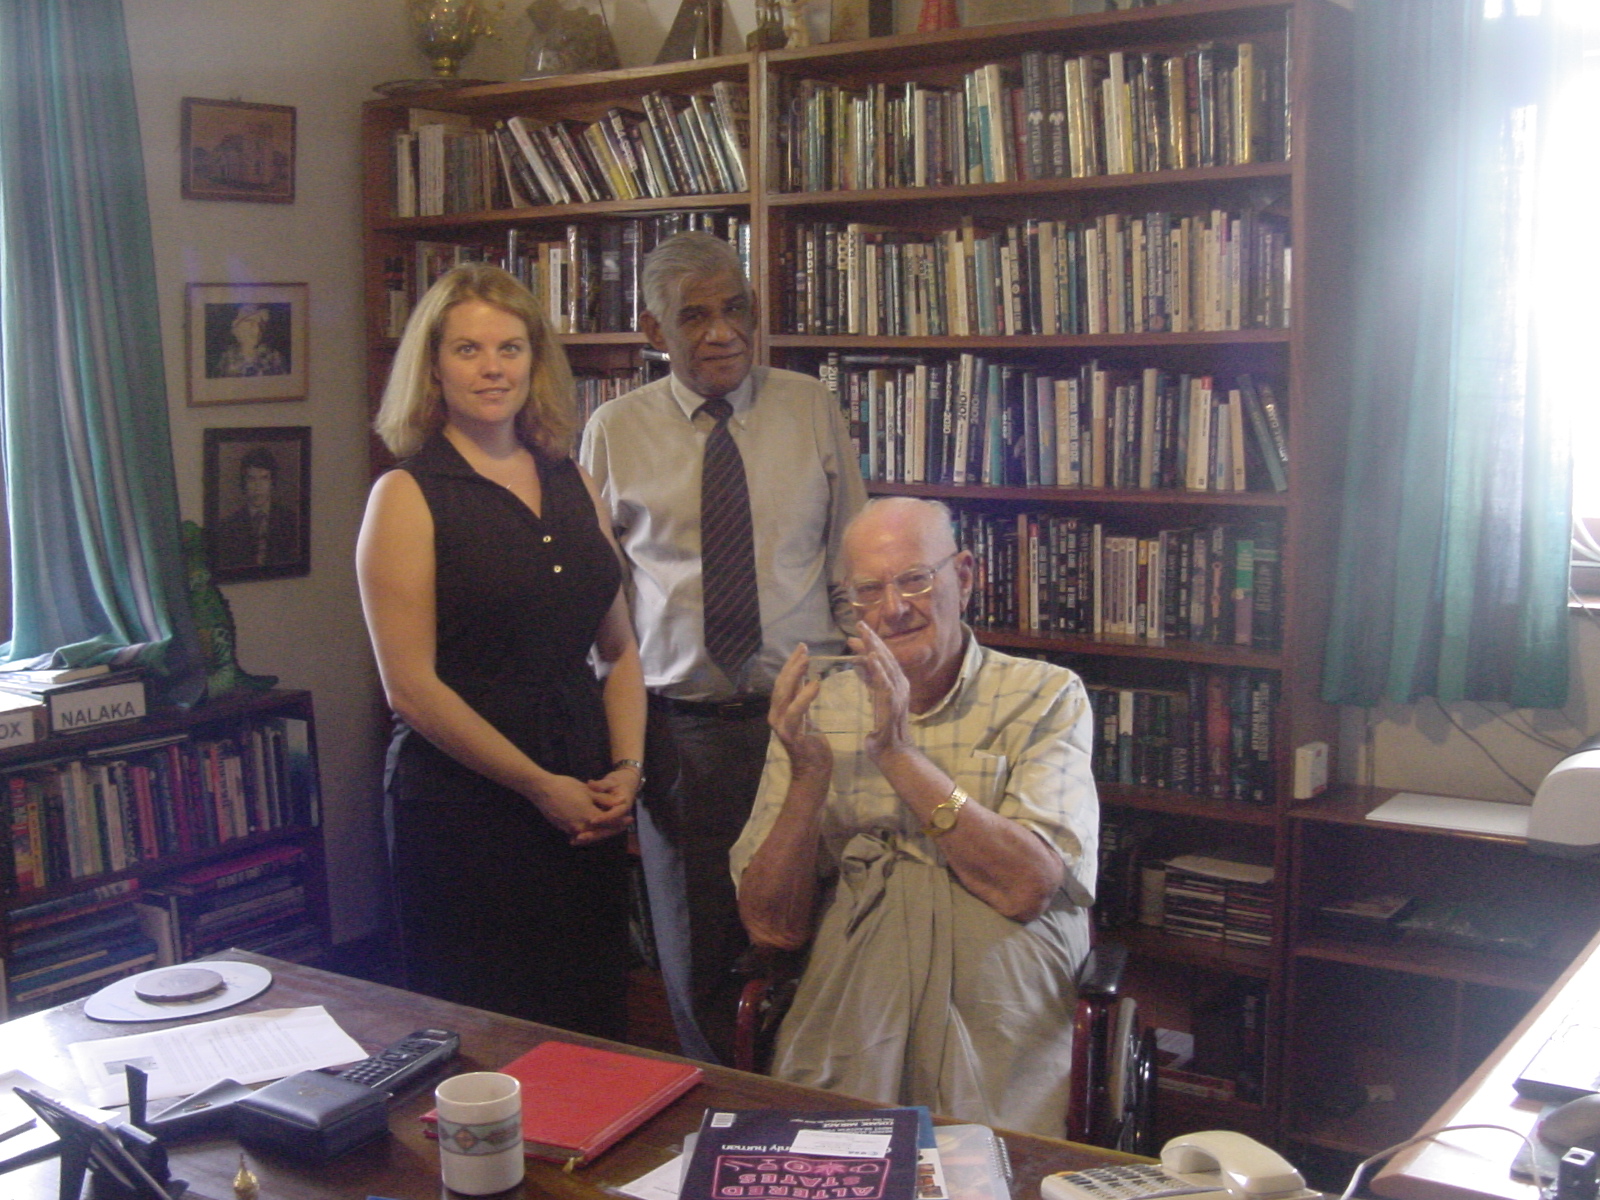 With Sir Arthur C. Clarke when he was presented with the Telluride Festival Award at his residence. Prof. Samaranayake helped the organizers of the Teluride Festival to link up Sir Arthur via satellite